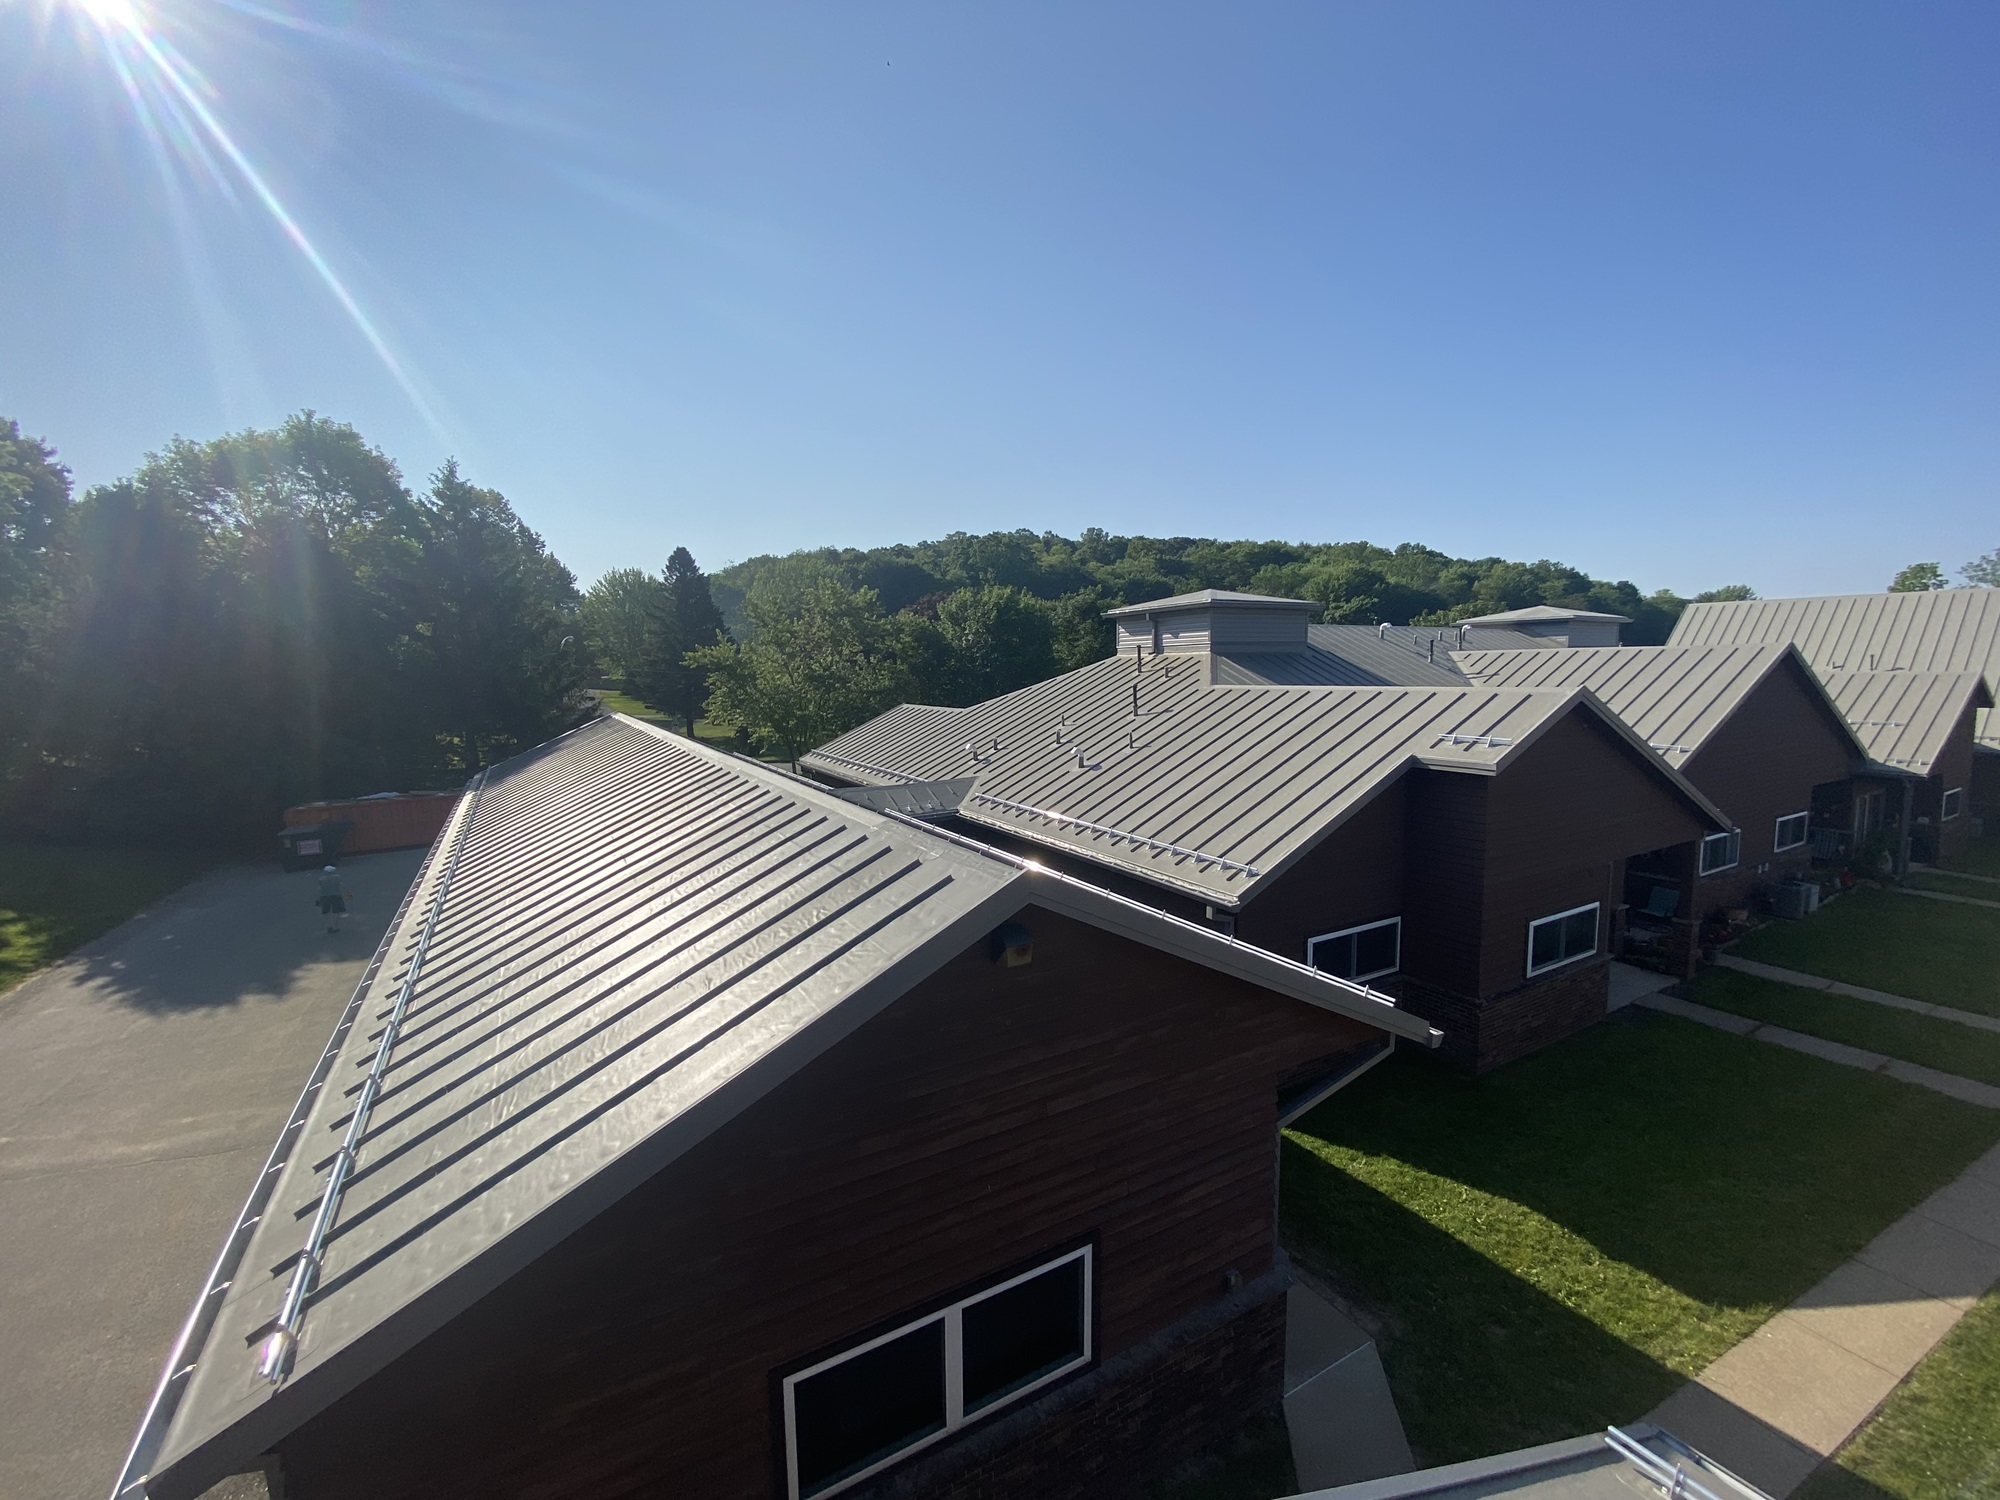 Revitalizing Grace Manor's Roof: Carlisle SynTec Systems Ensures Senior Comfort with Innovative Solutions